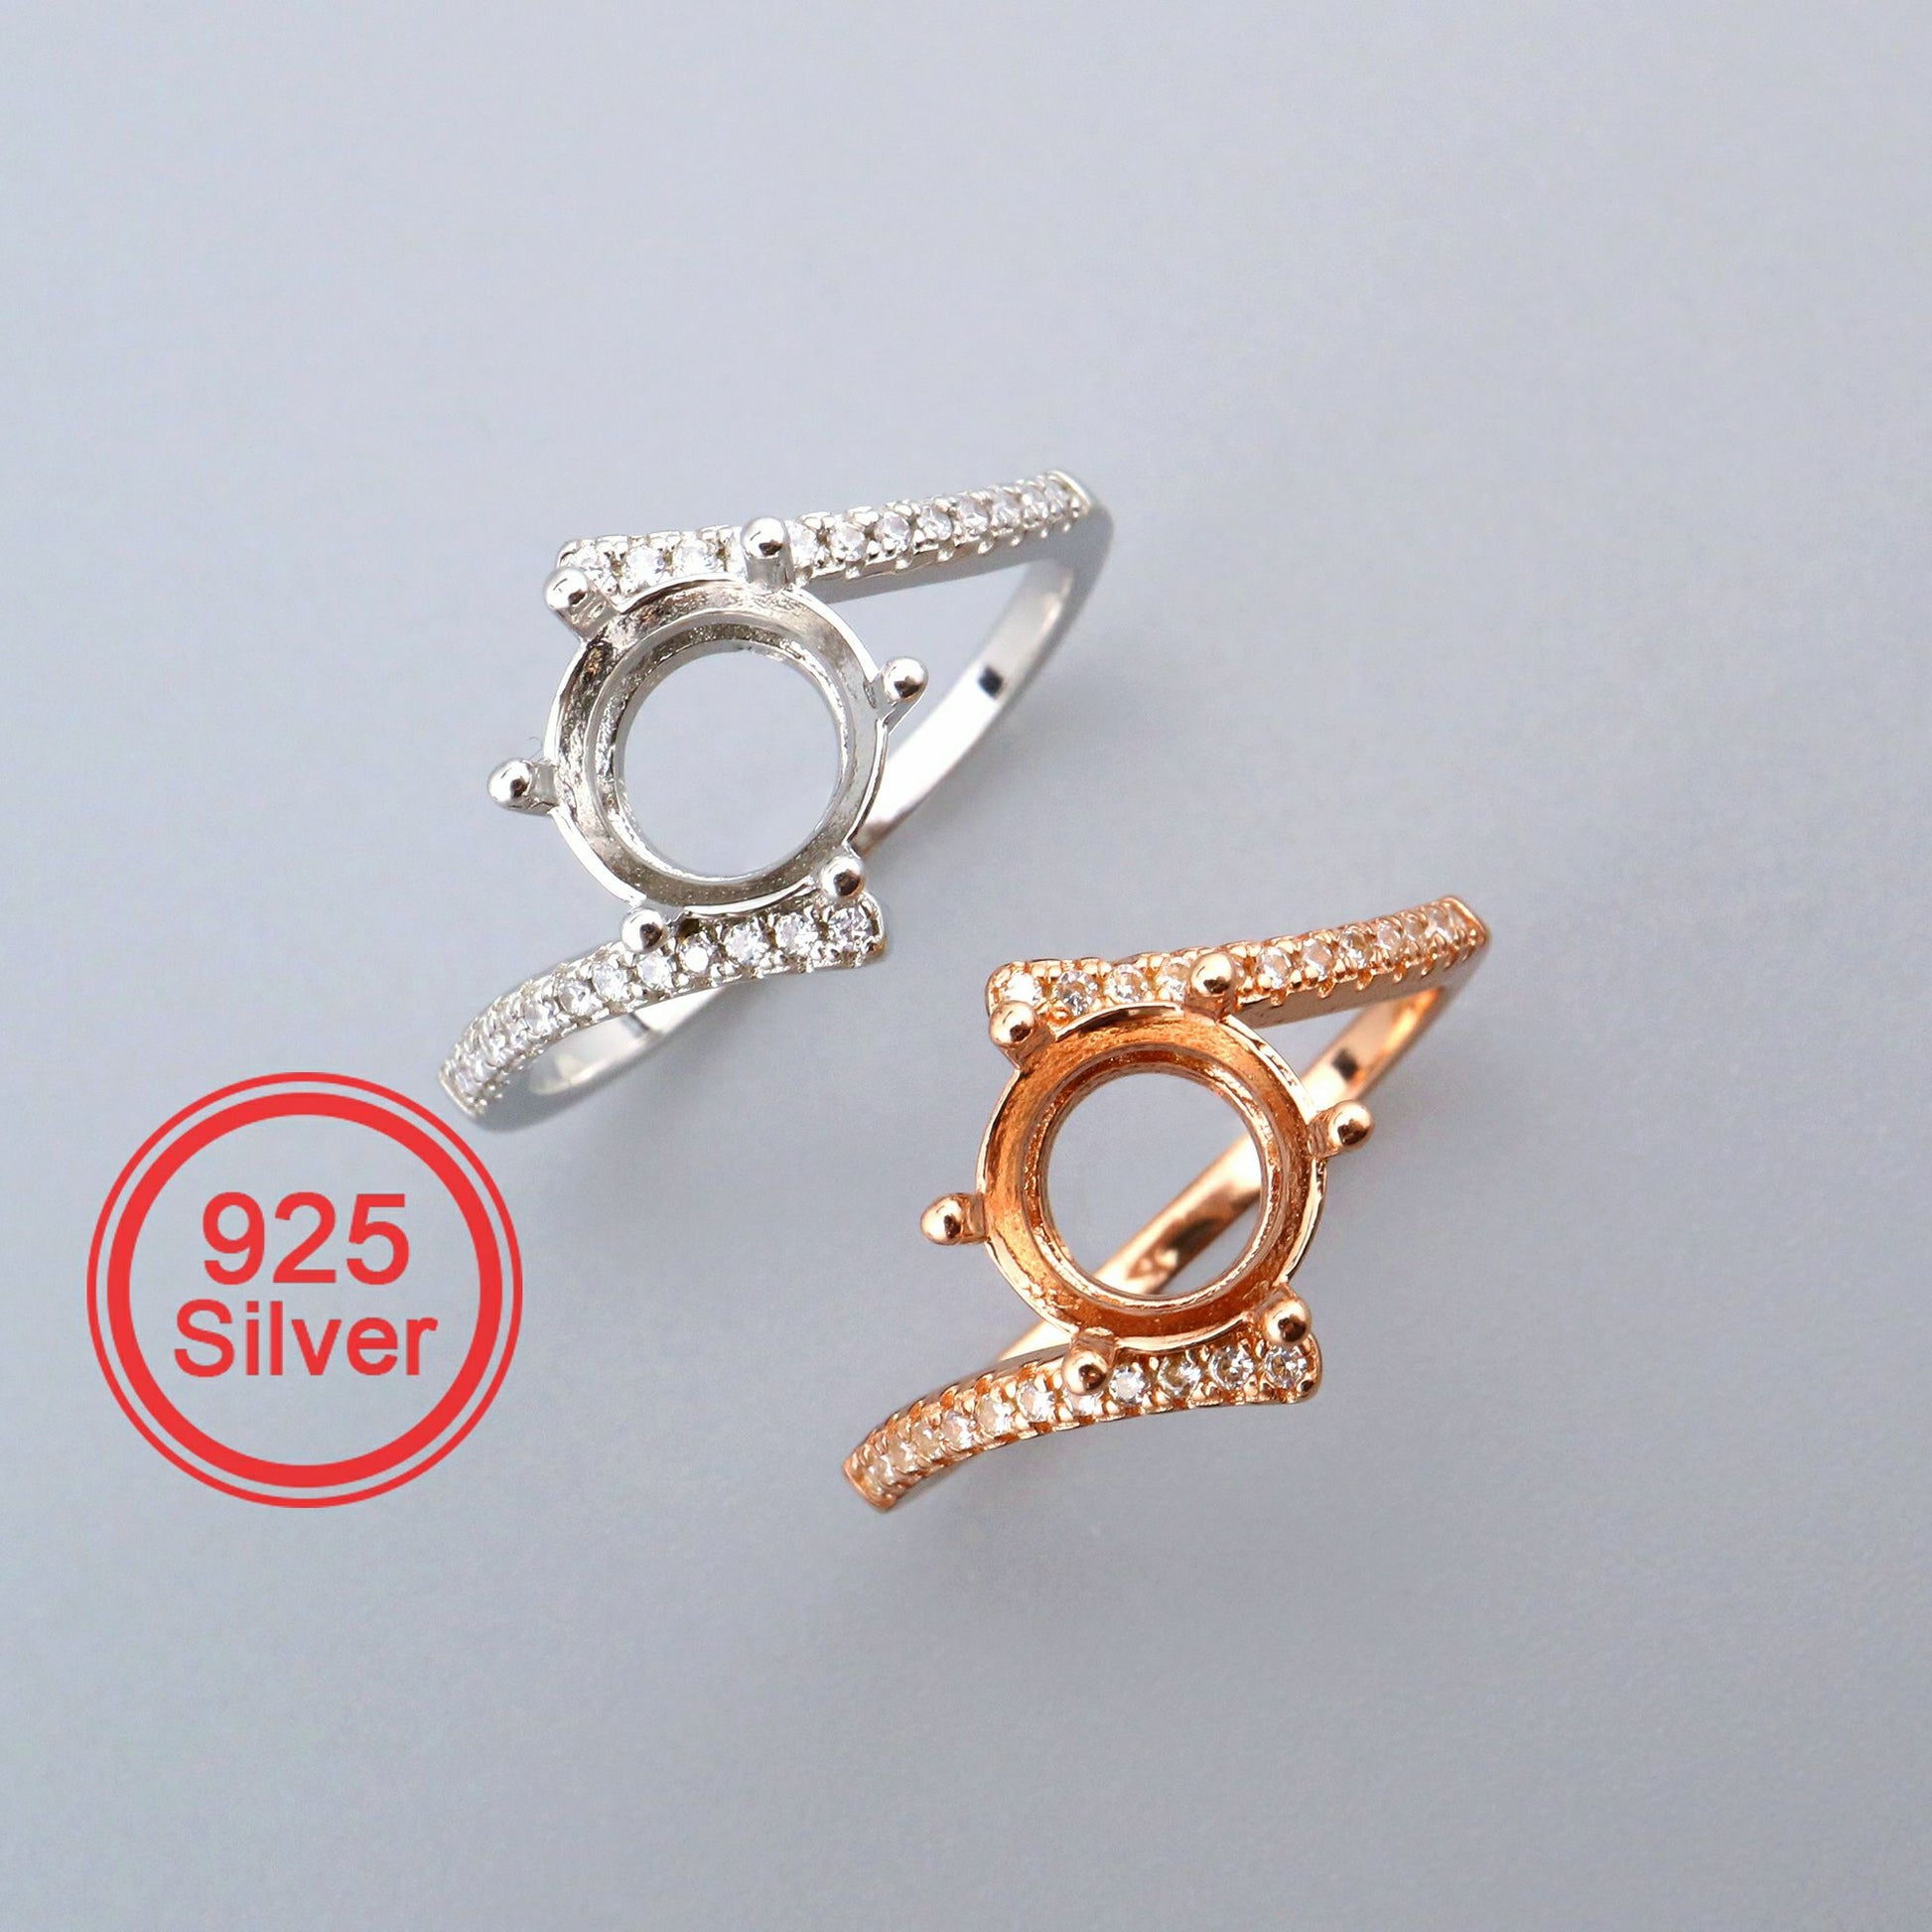 One silver and one rose gold pave bypass semi mount for a round cut gem.